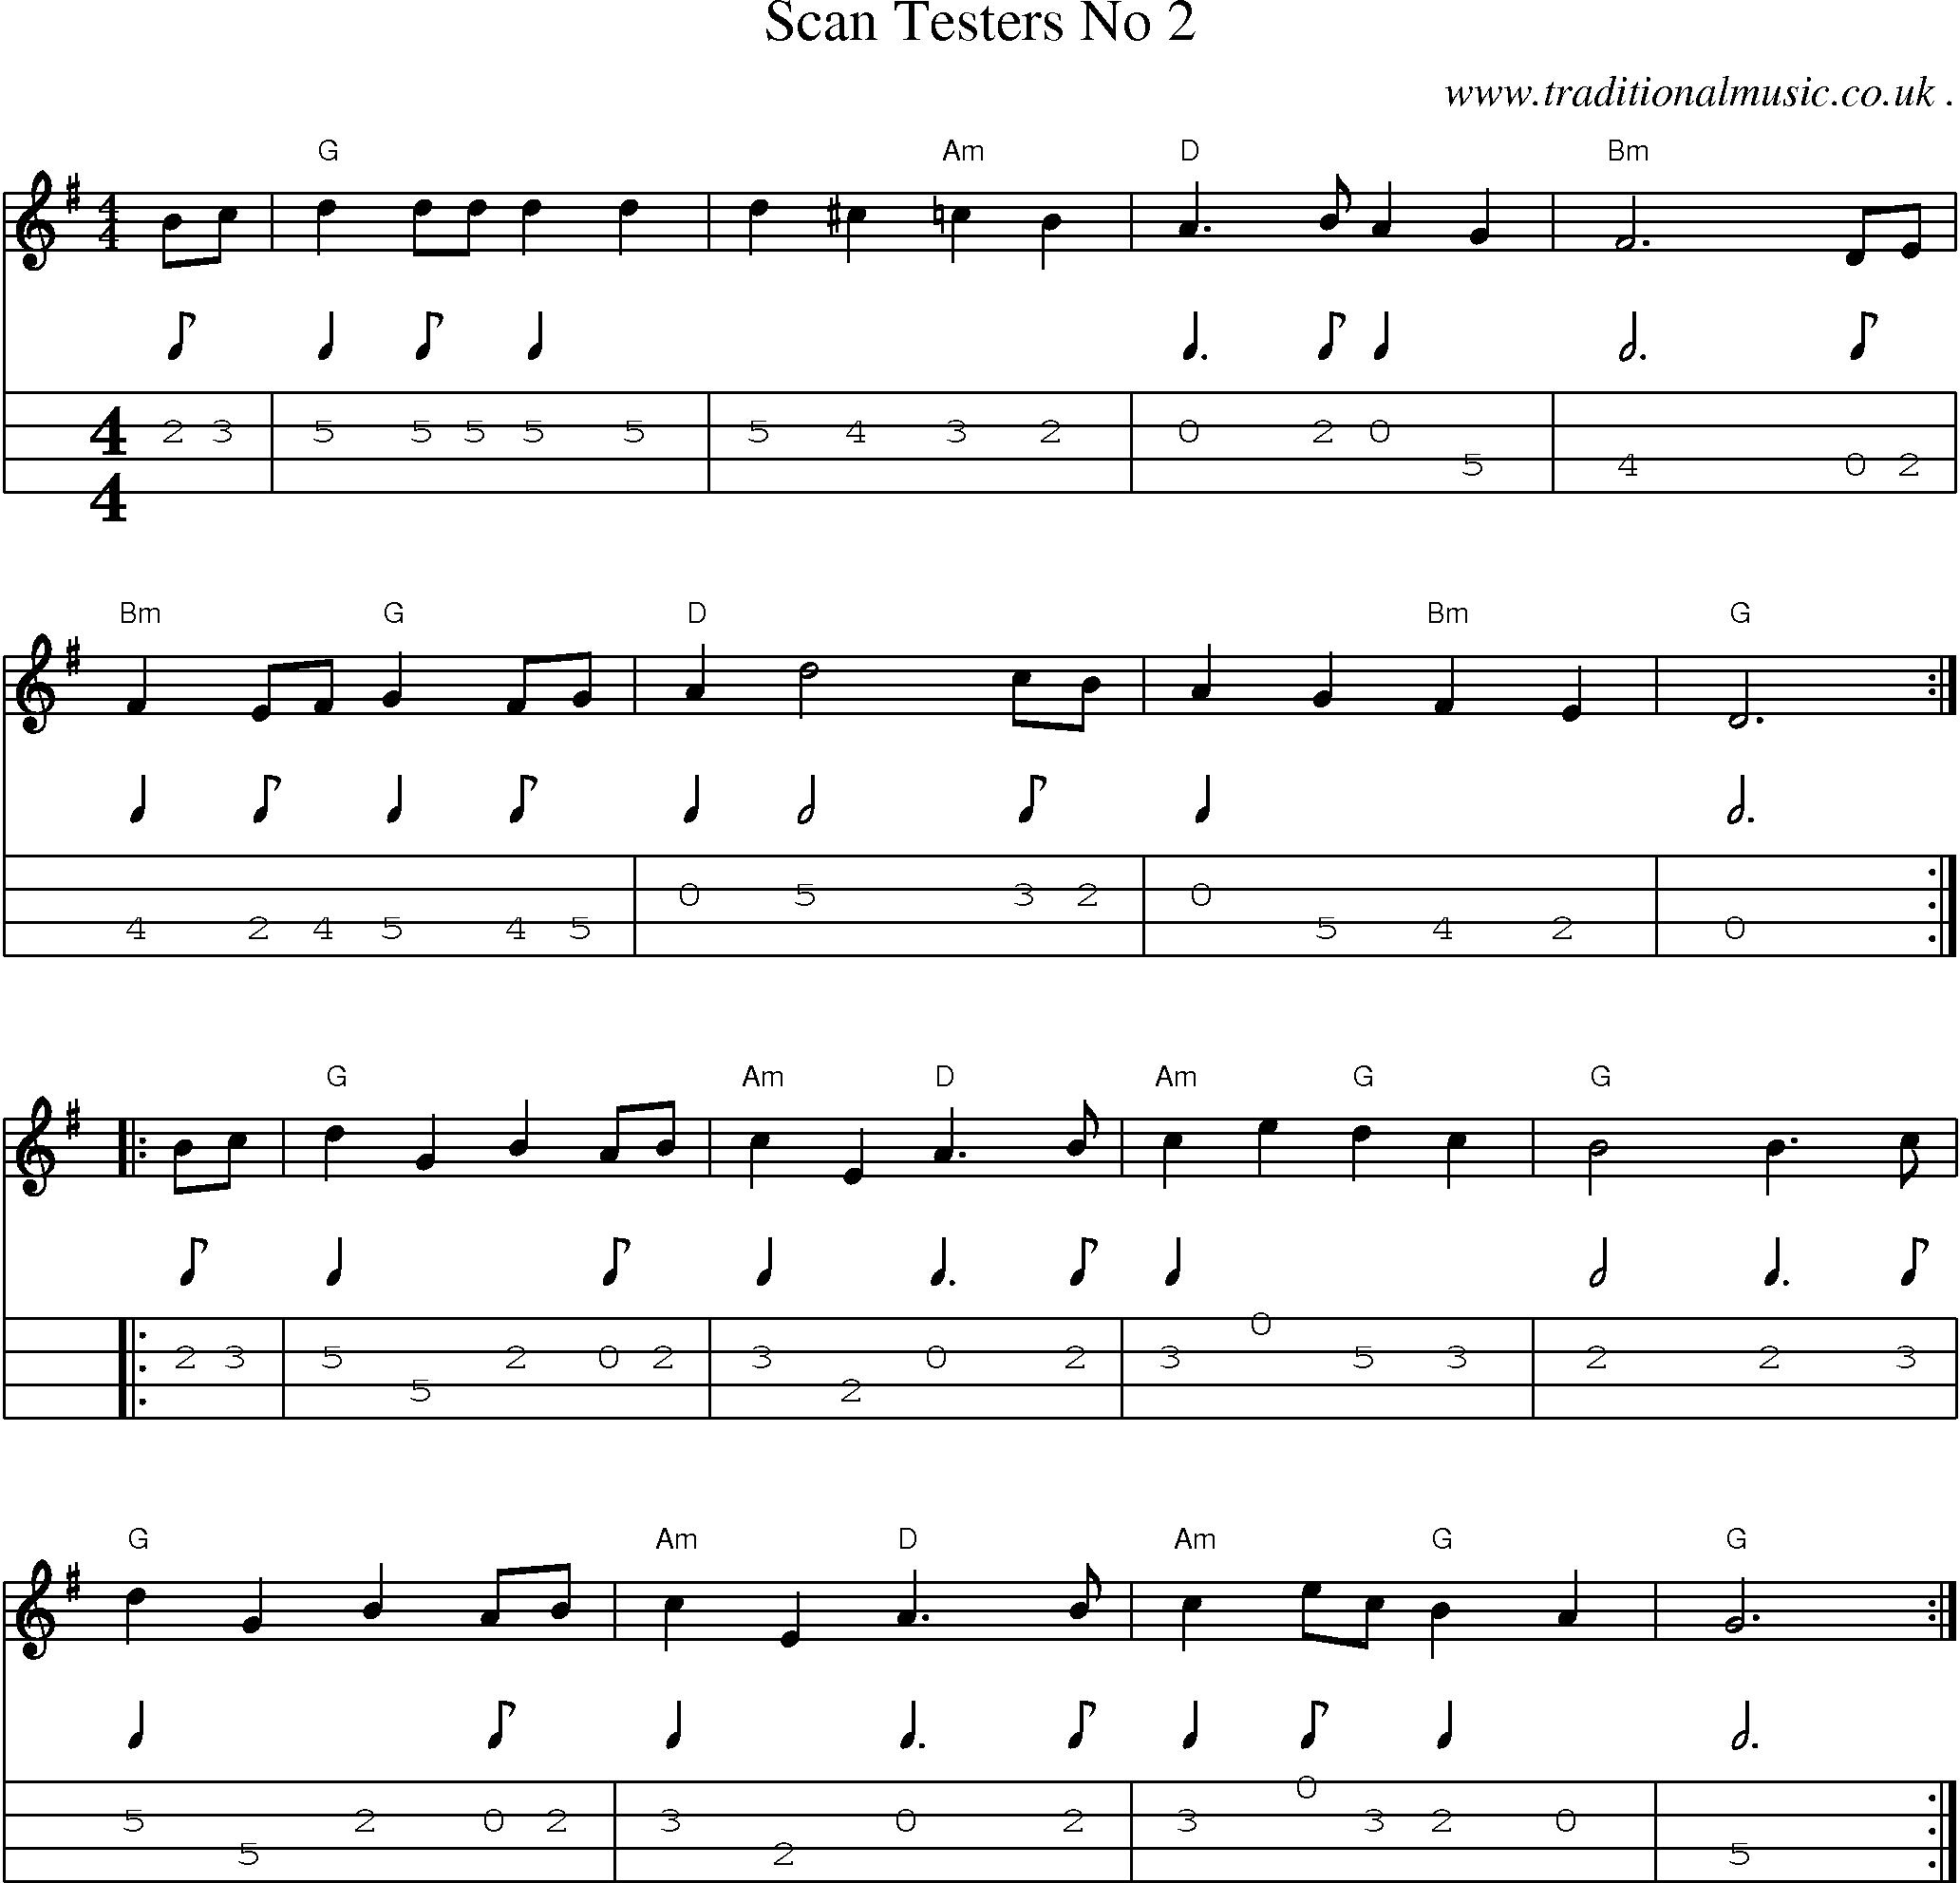 Music Score and Guitar Tabs for Scan Testers No 2